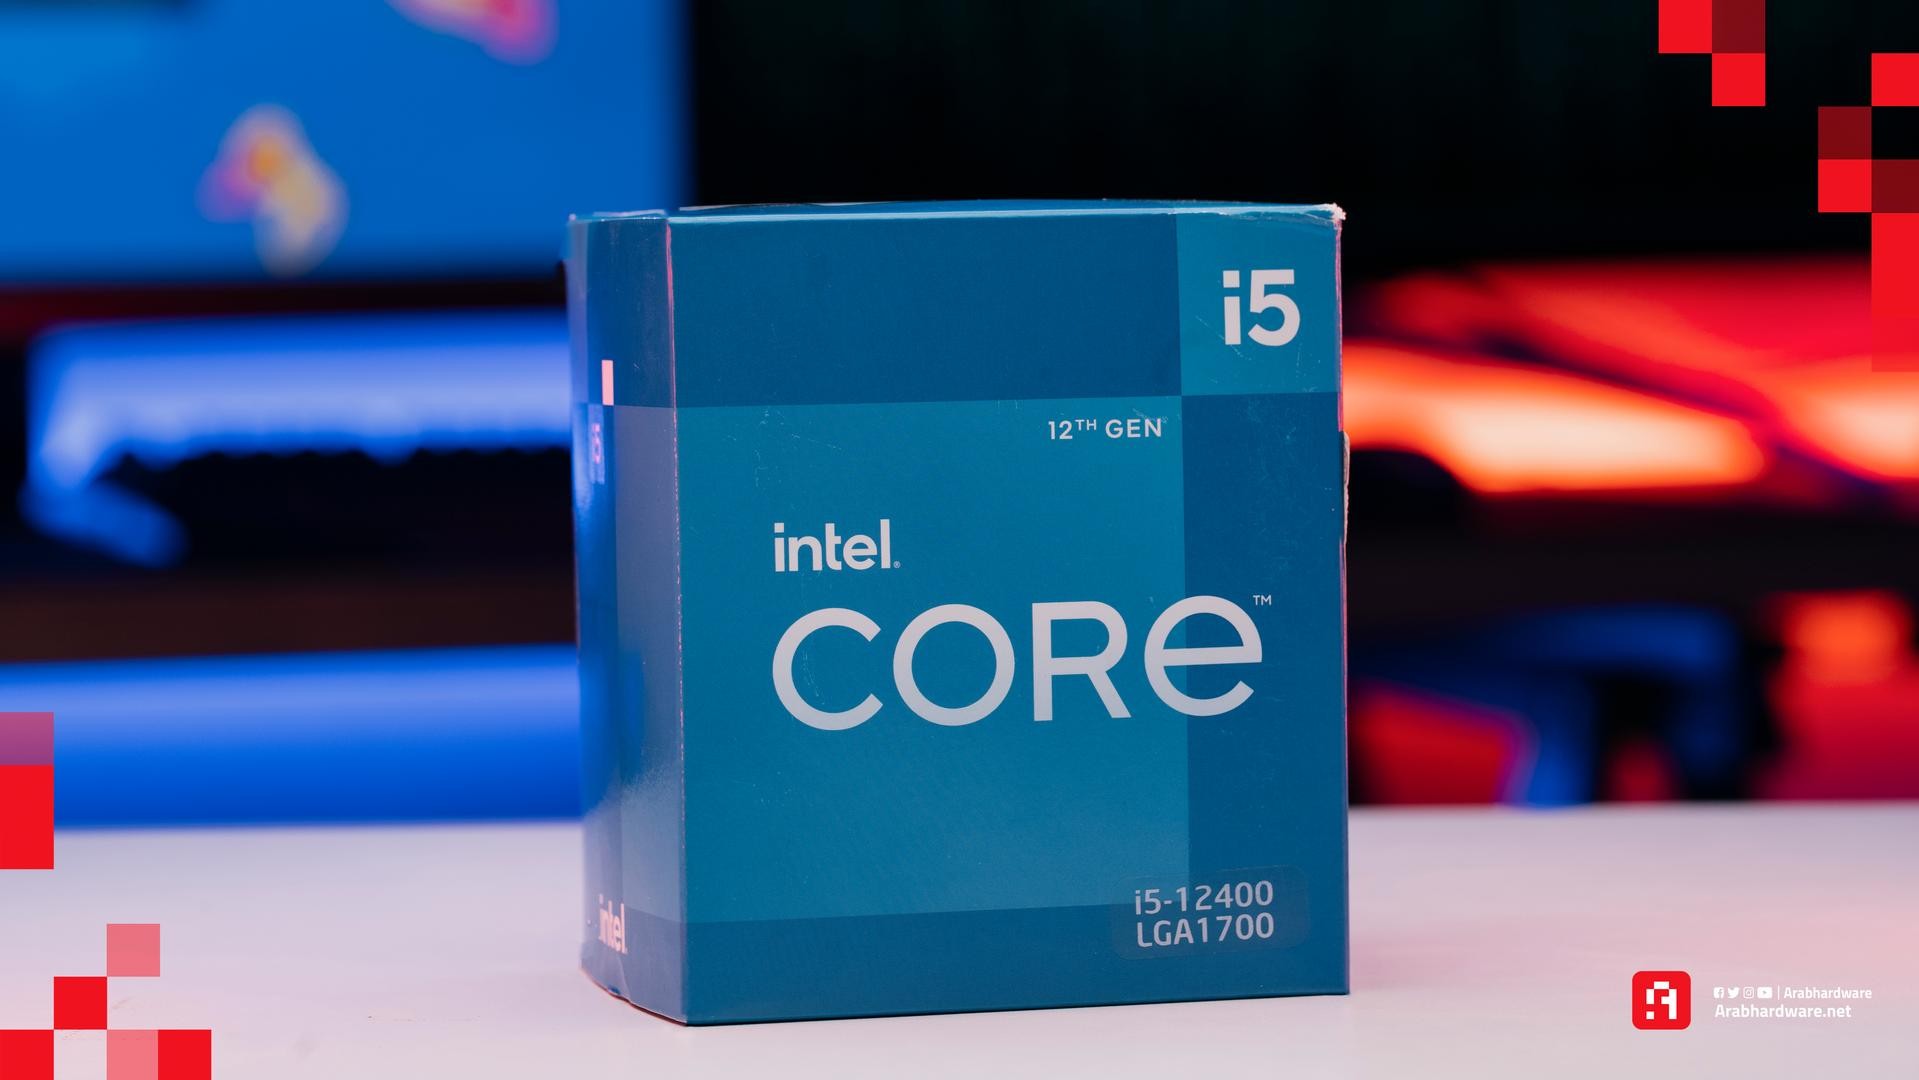 Intel Core i5 12400 Package